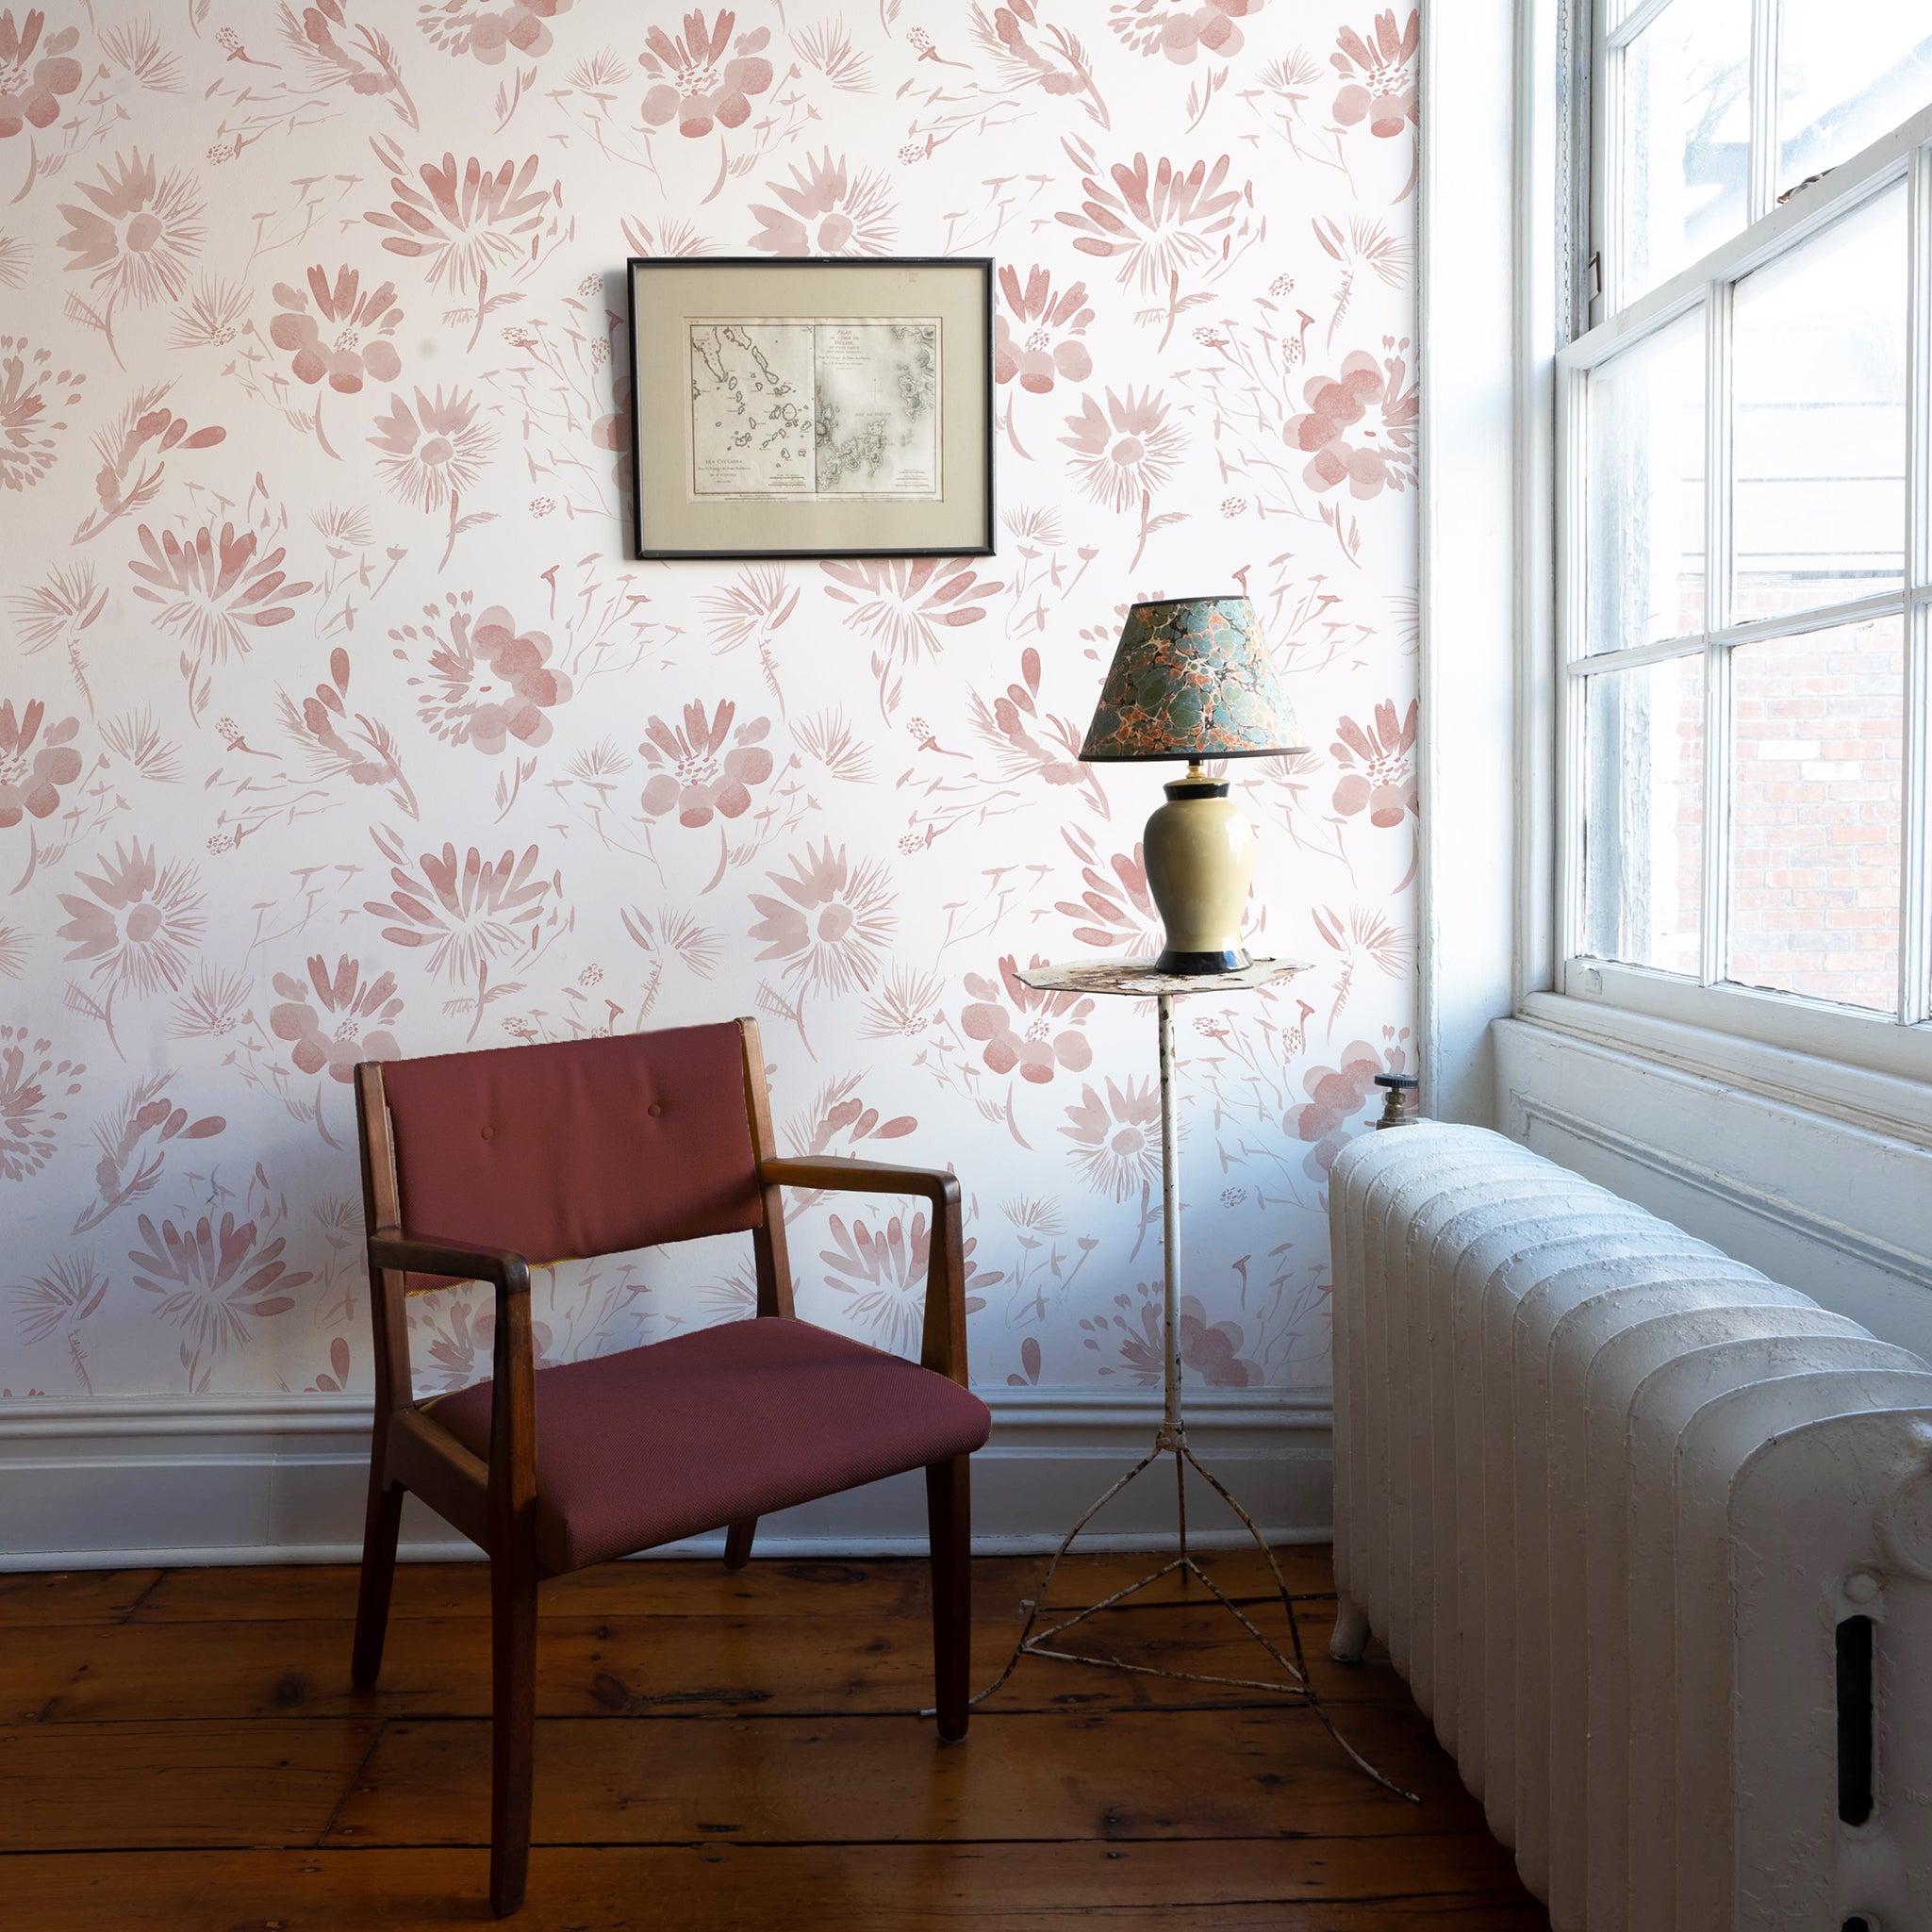 Nursery Room corner styled with Pink Floral custom wallpaper with wooden red chair in front by green and floral lamp on white circular small table next to window